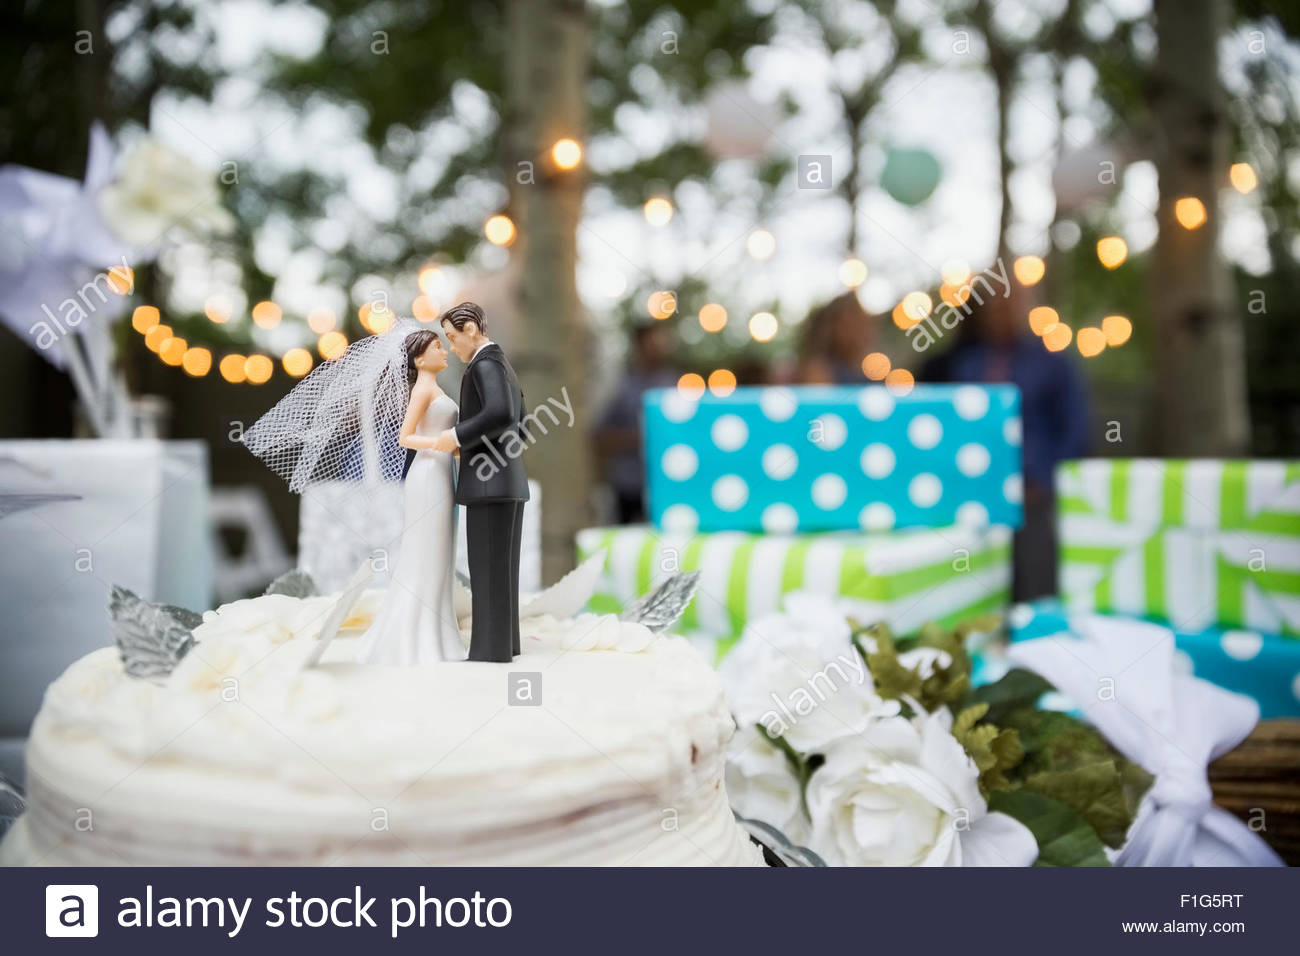 Bride and Groom cake topper on cake Banque D'Images